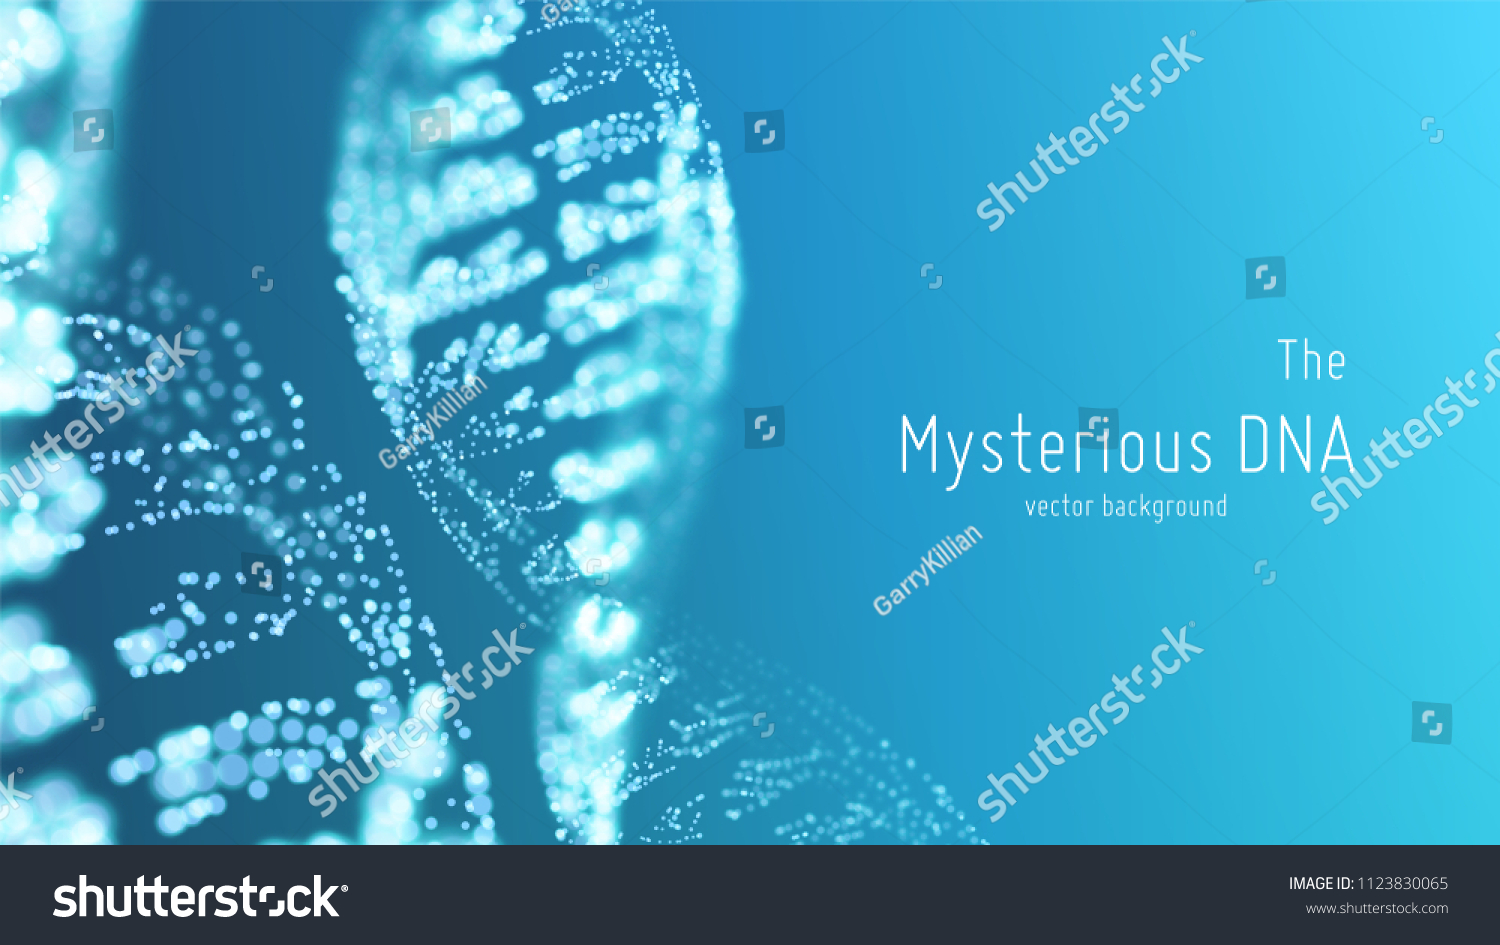 Vector abstract blue DNA double helix illustration with shallow depth of field. Mysterious source of life background. Genom futuristic image. Conceptual design of genetics information #1123830065